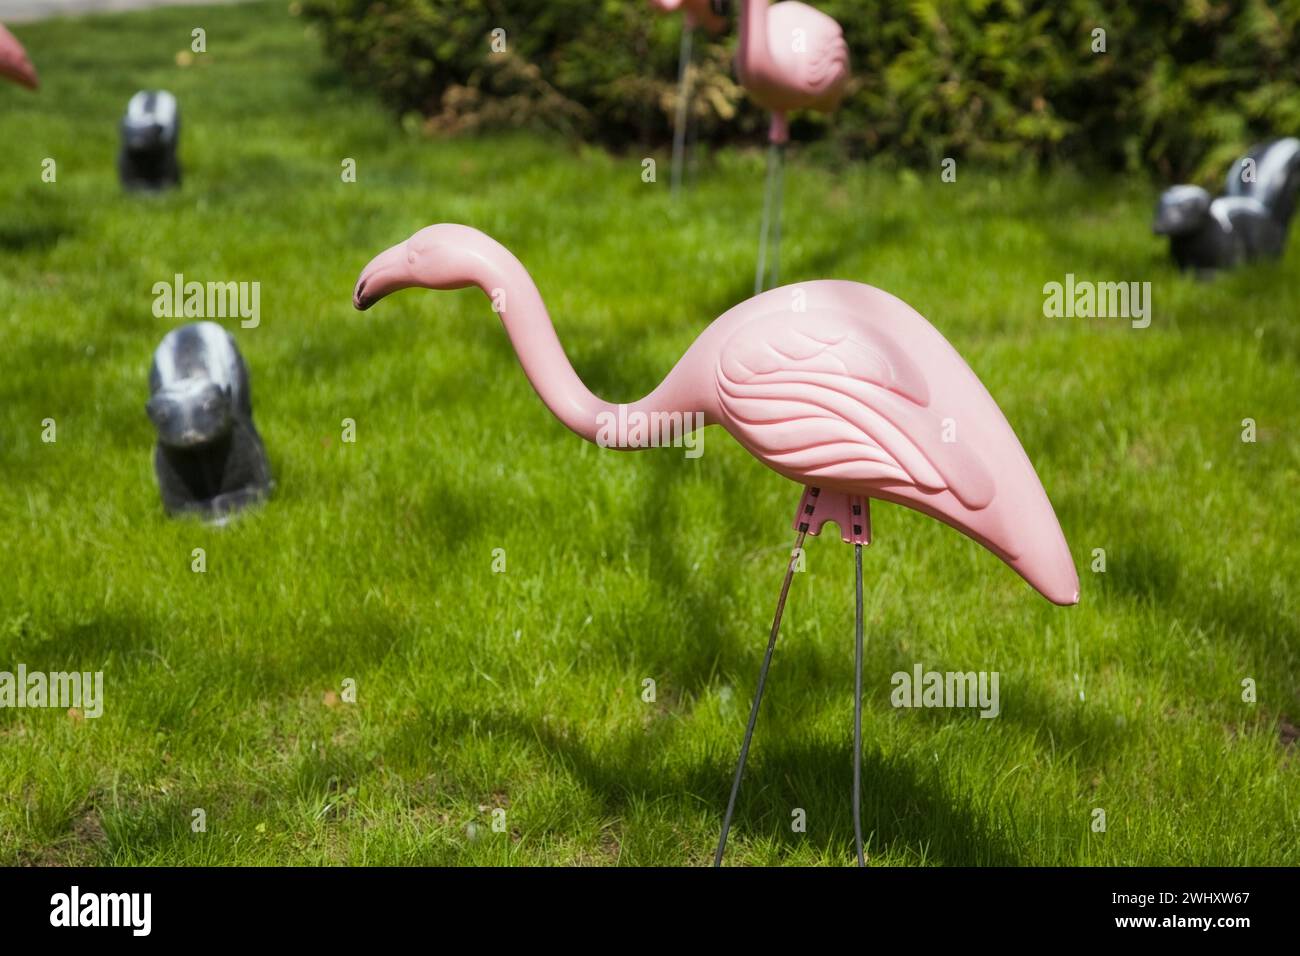 Decorative plastic pink Phoenicopterus ruber - Flamingos and Mephitis - Striped Skunk decoys on green grass lawn to celebrate a birthday in spring. Stock Photo